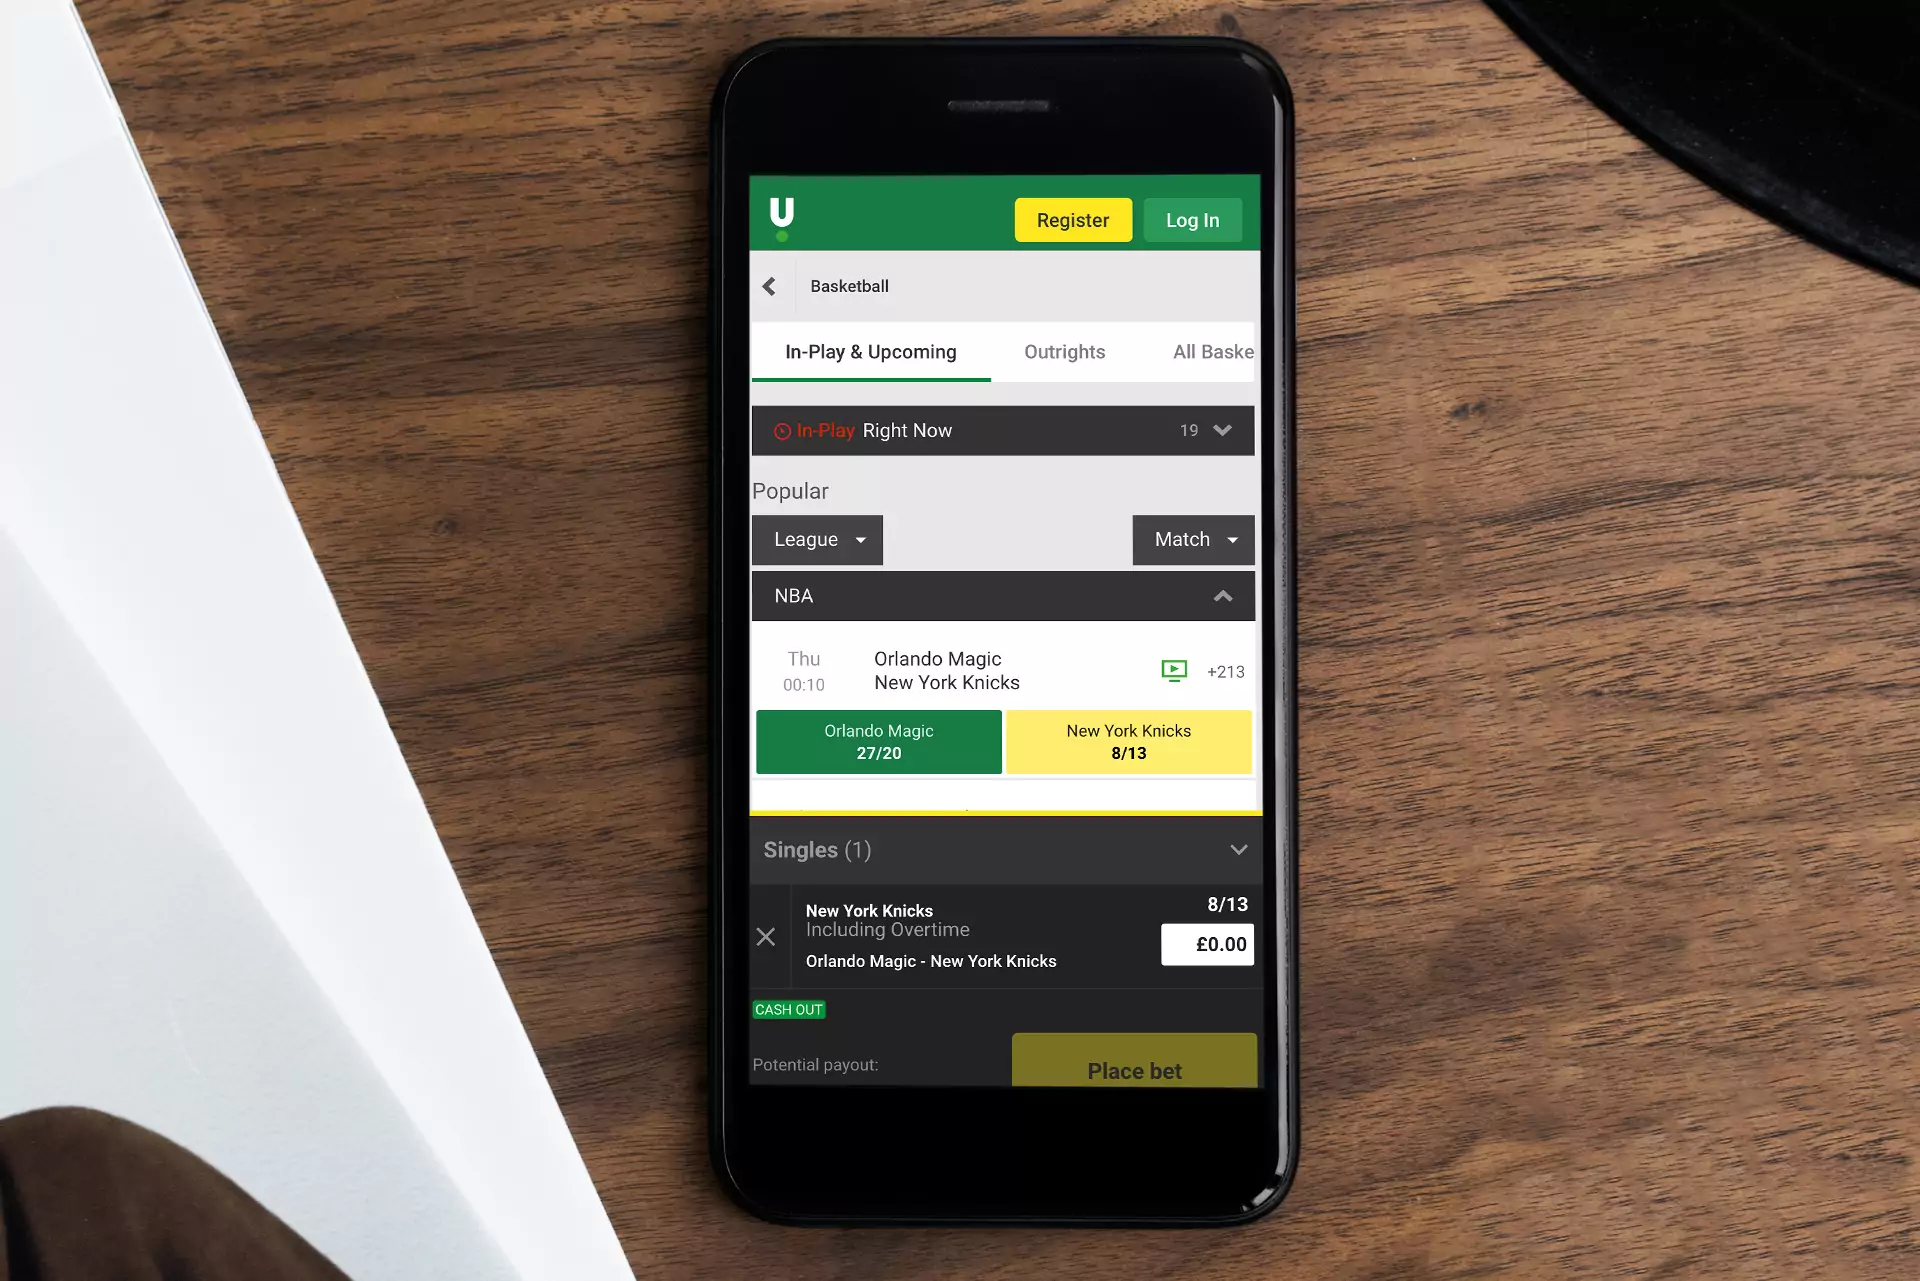 Users can run the browser version of Unibet.